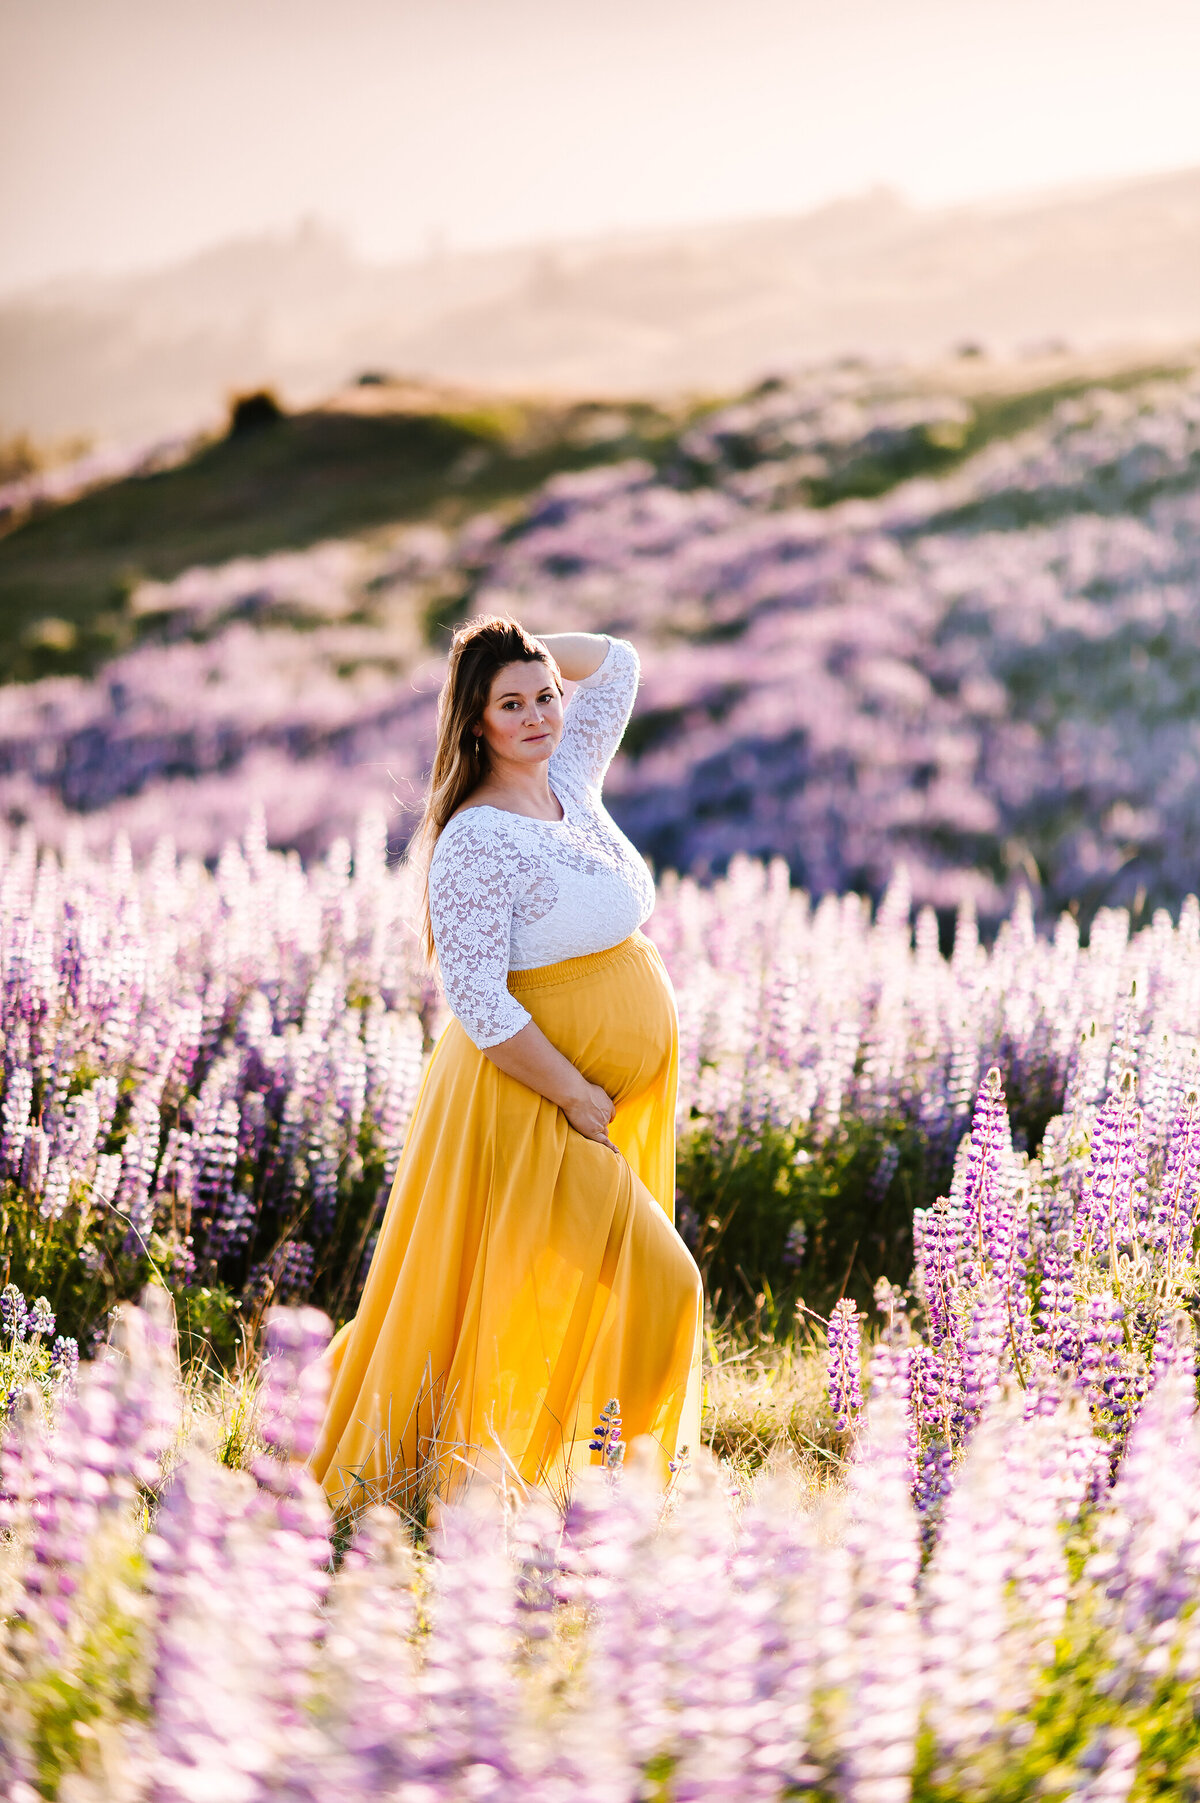 Maternity photo shoot in the wild flowers, by Katie Anne Southern Oregon Photographer